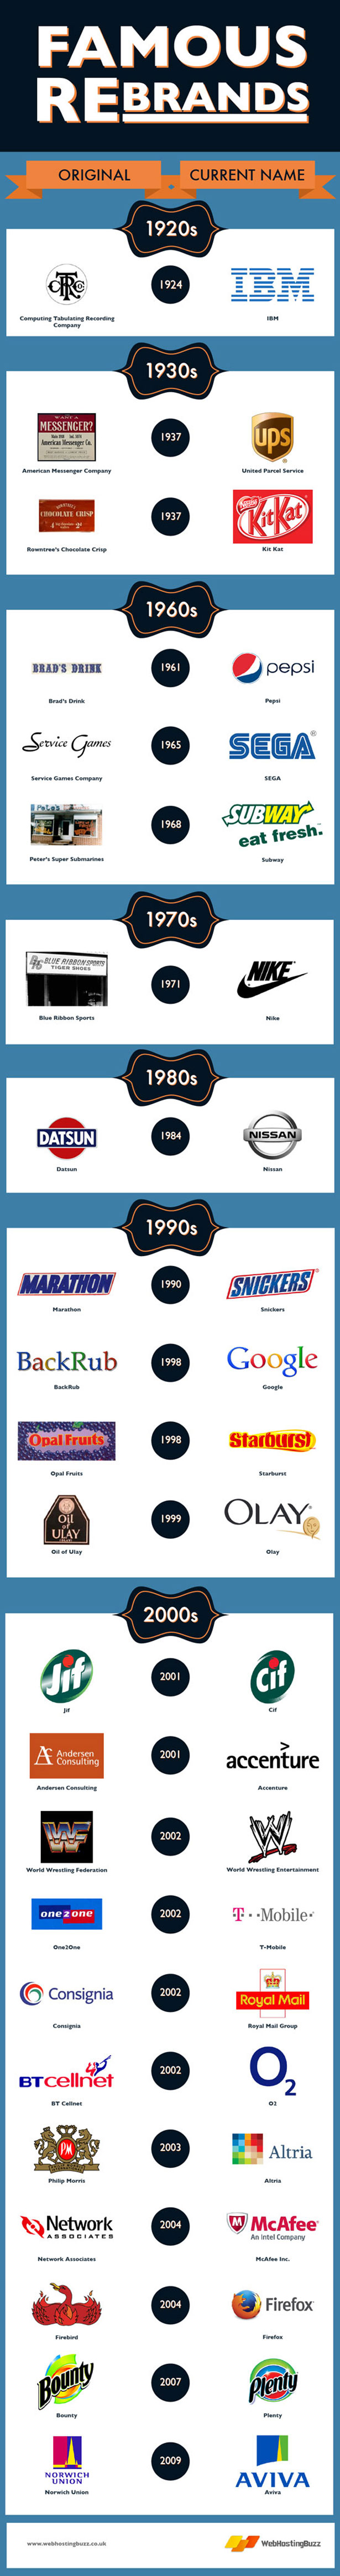 famous-rebrands-infographic1